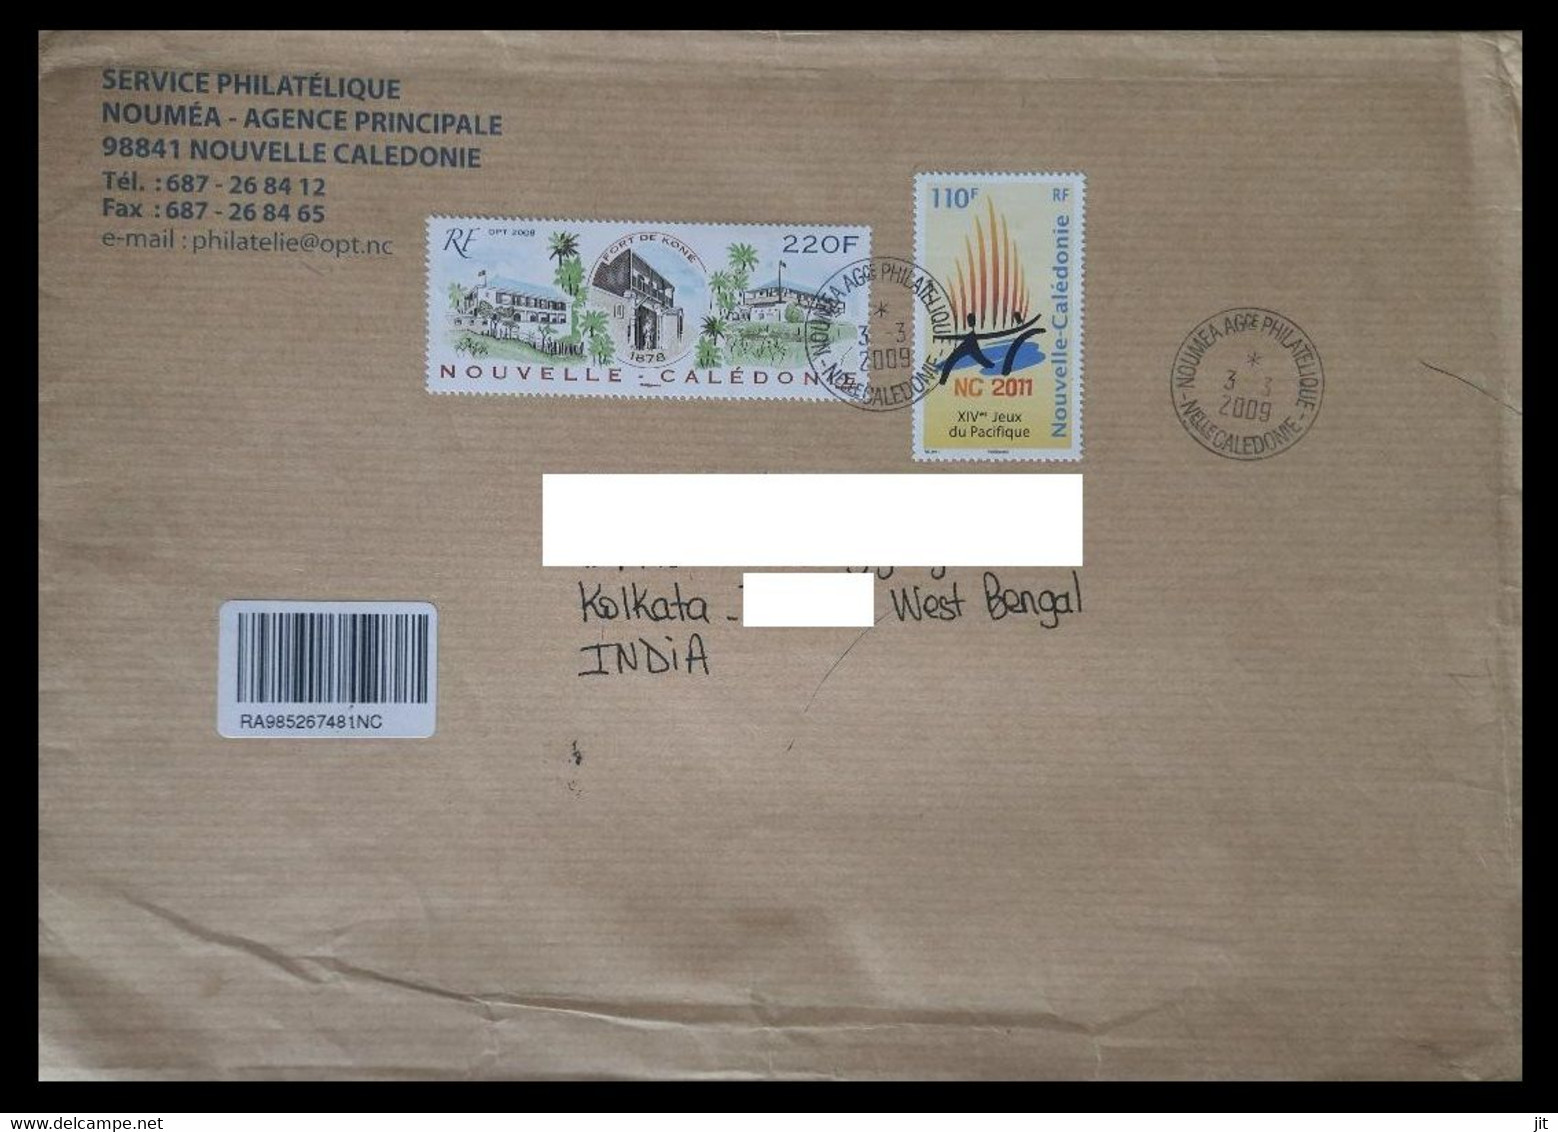 165.NEW CALEDONIA 2009 USED REGISTERED AIRMAIL COVER TO INDIA WITH (02) STAMPS . - Postal Stationery